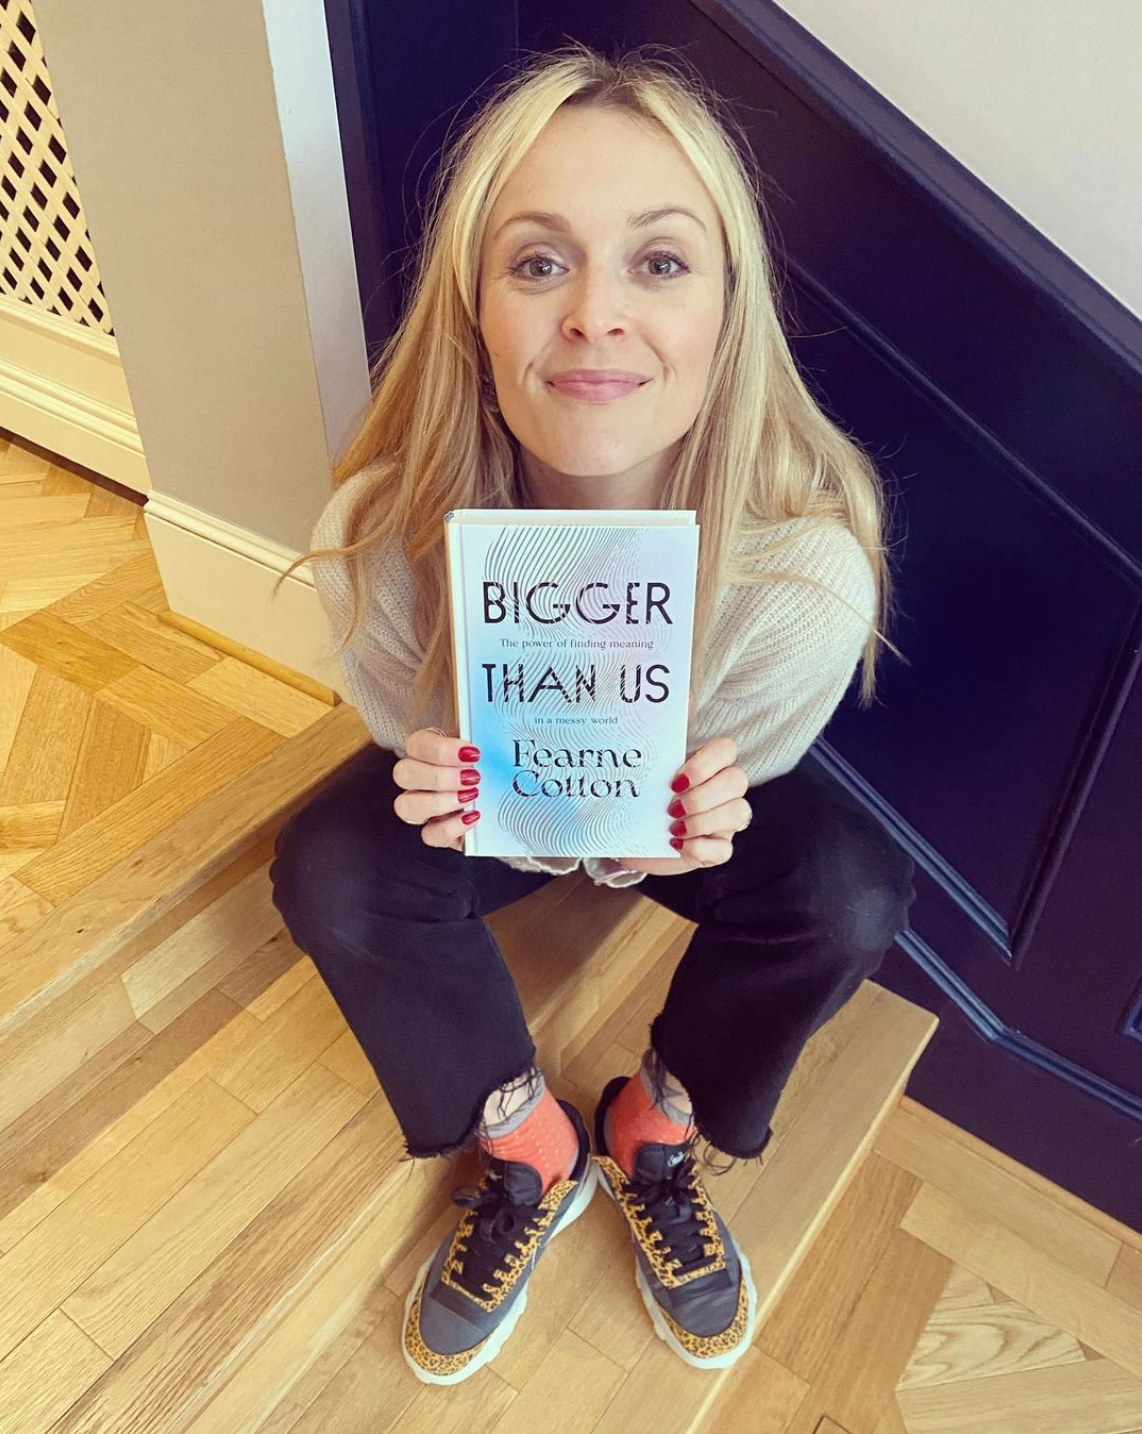 Fearne Cotton Author of "Bigger Than Us"